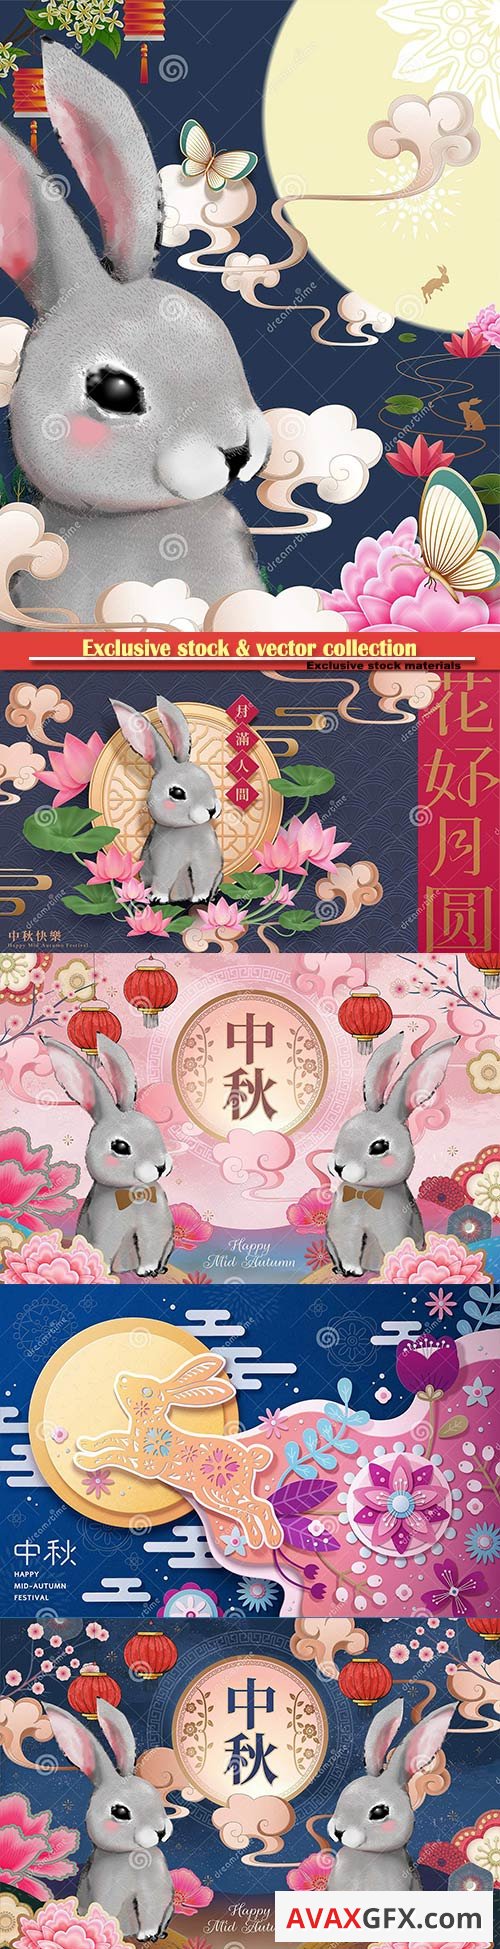 Cute fluffy grey rabbit and lotus for Mid autumn festival design